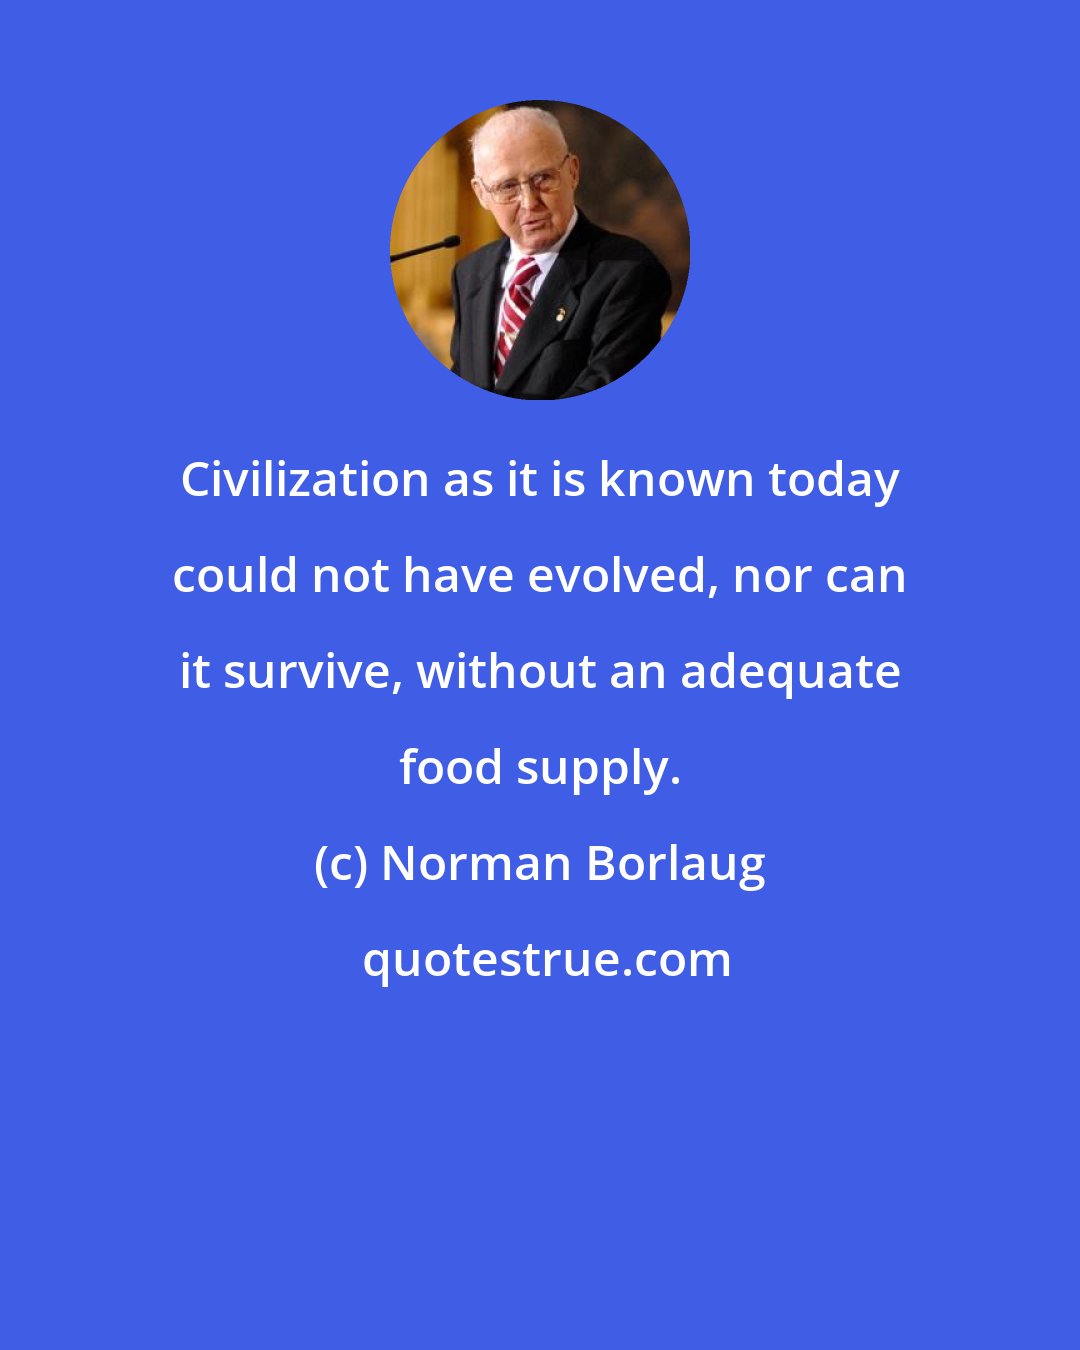 Norman Borlaug: Civilization as it is known today could not have evolved, nor can it survive, without an adequate food supply.